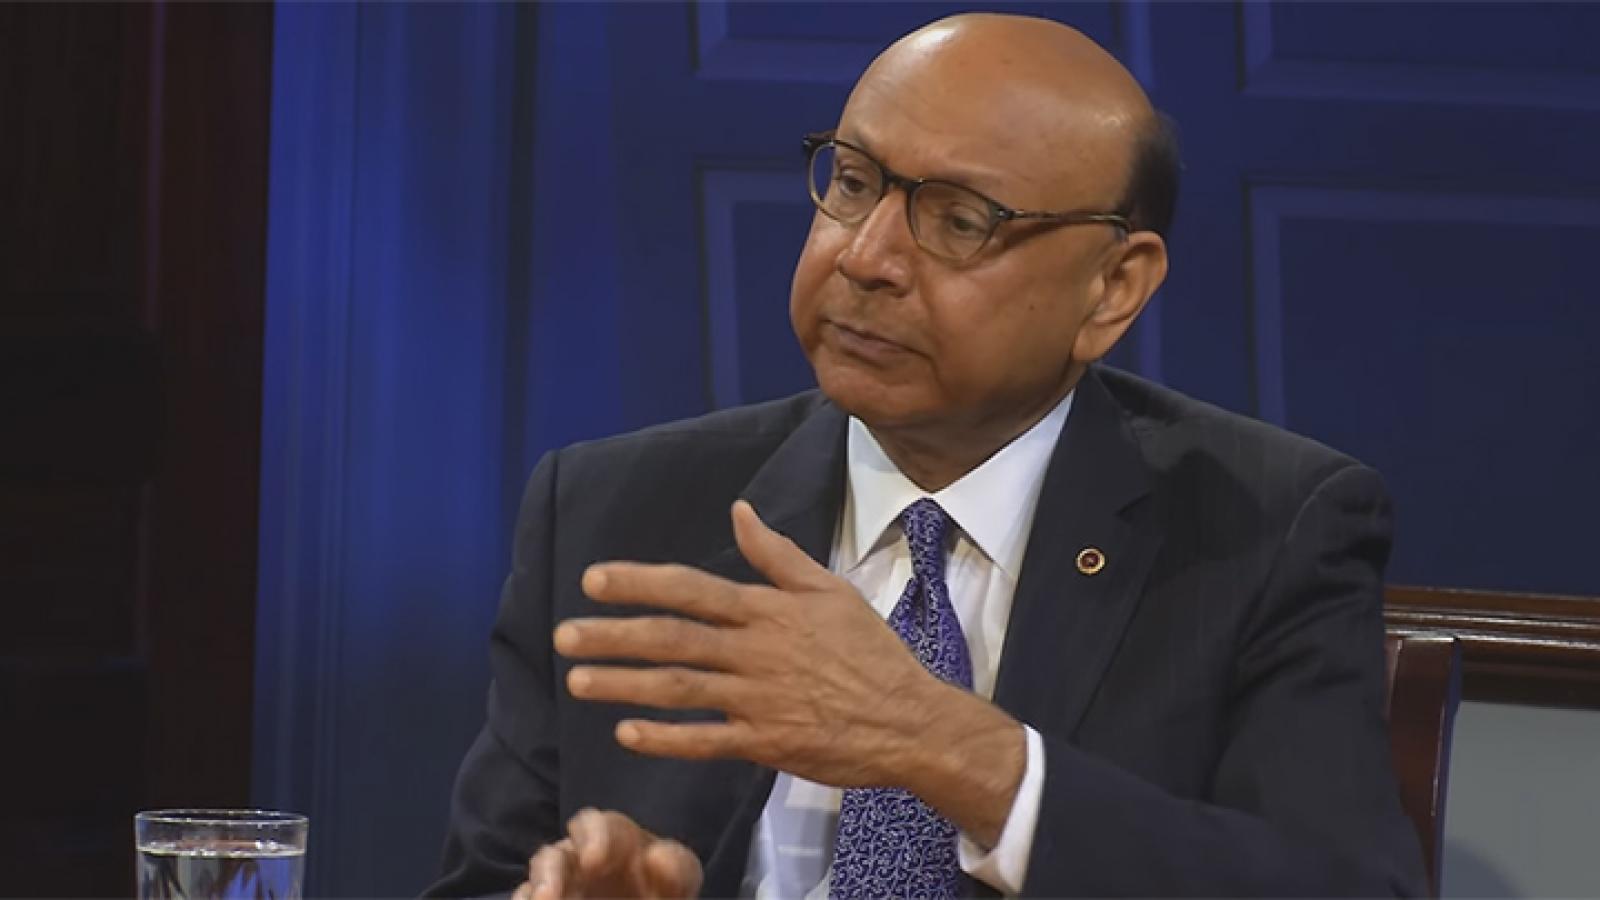 Muslim American Gold Star father Khizr Khan on why he carries a copy of the U.S. Constitution